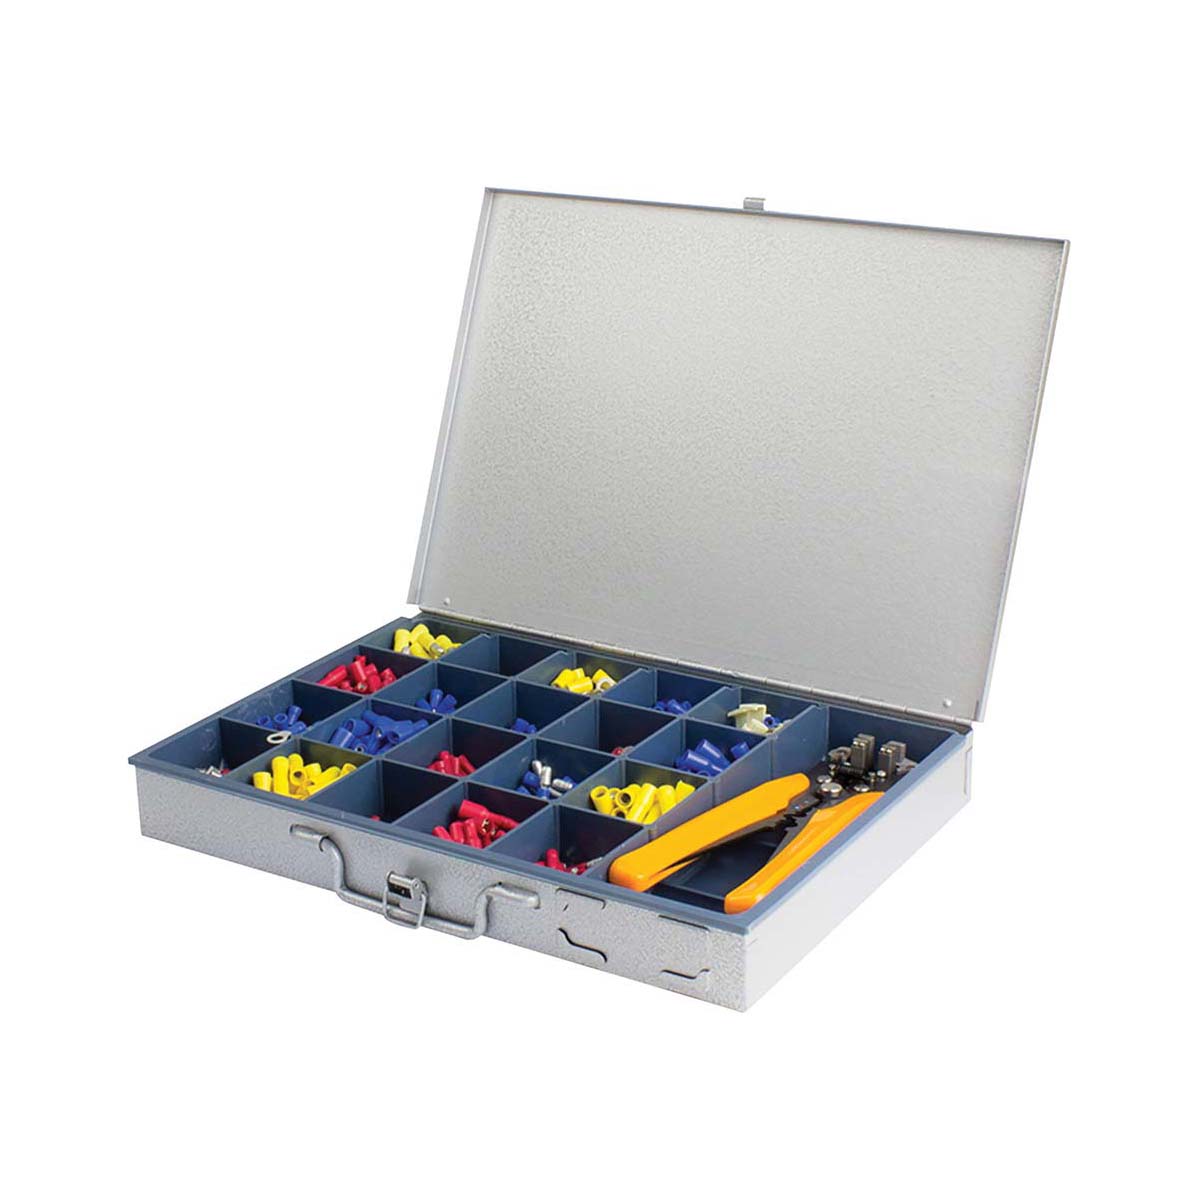 KT Cables Insulated Terminal Kit Assortment in Heavy Duty Steel Case with Wire Stripper